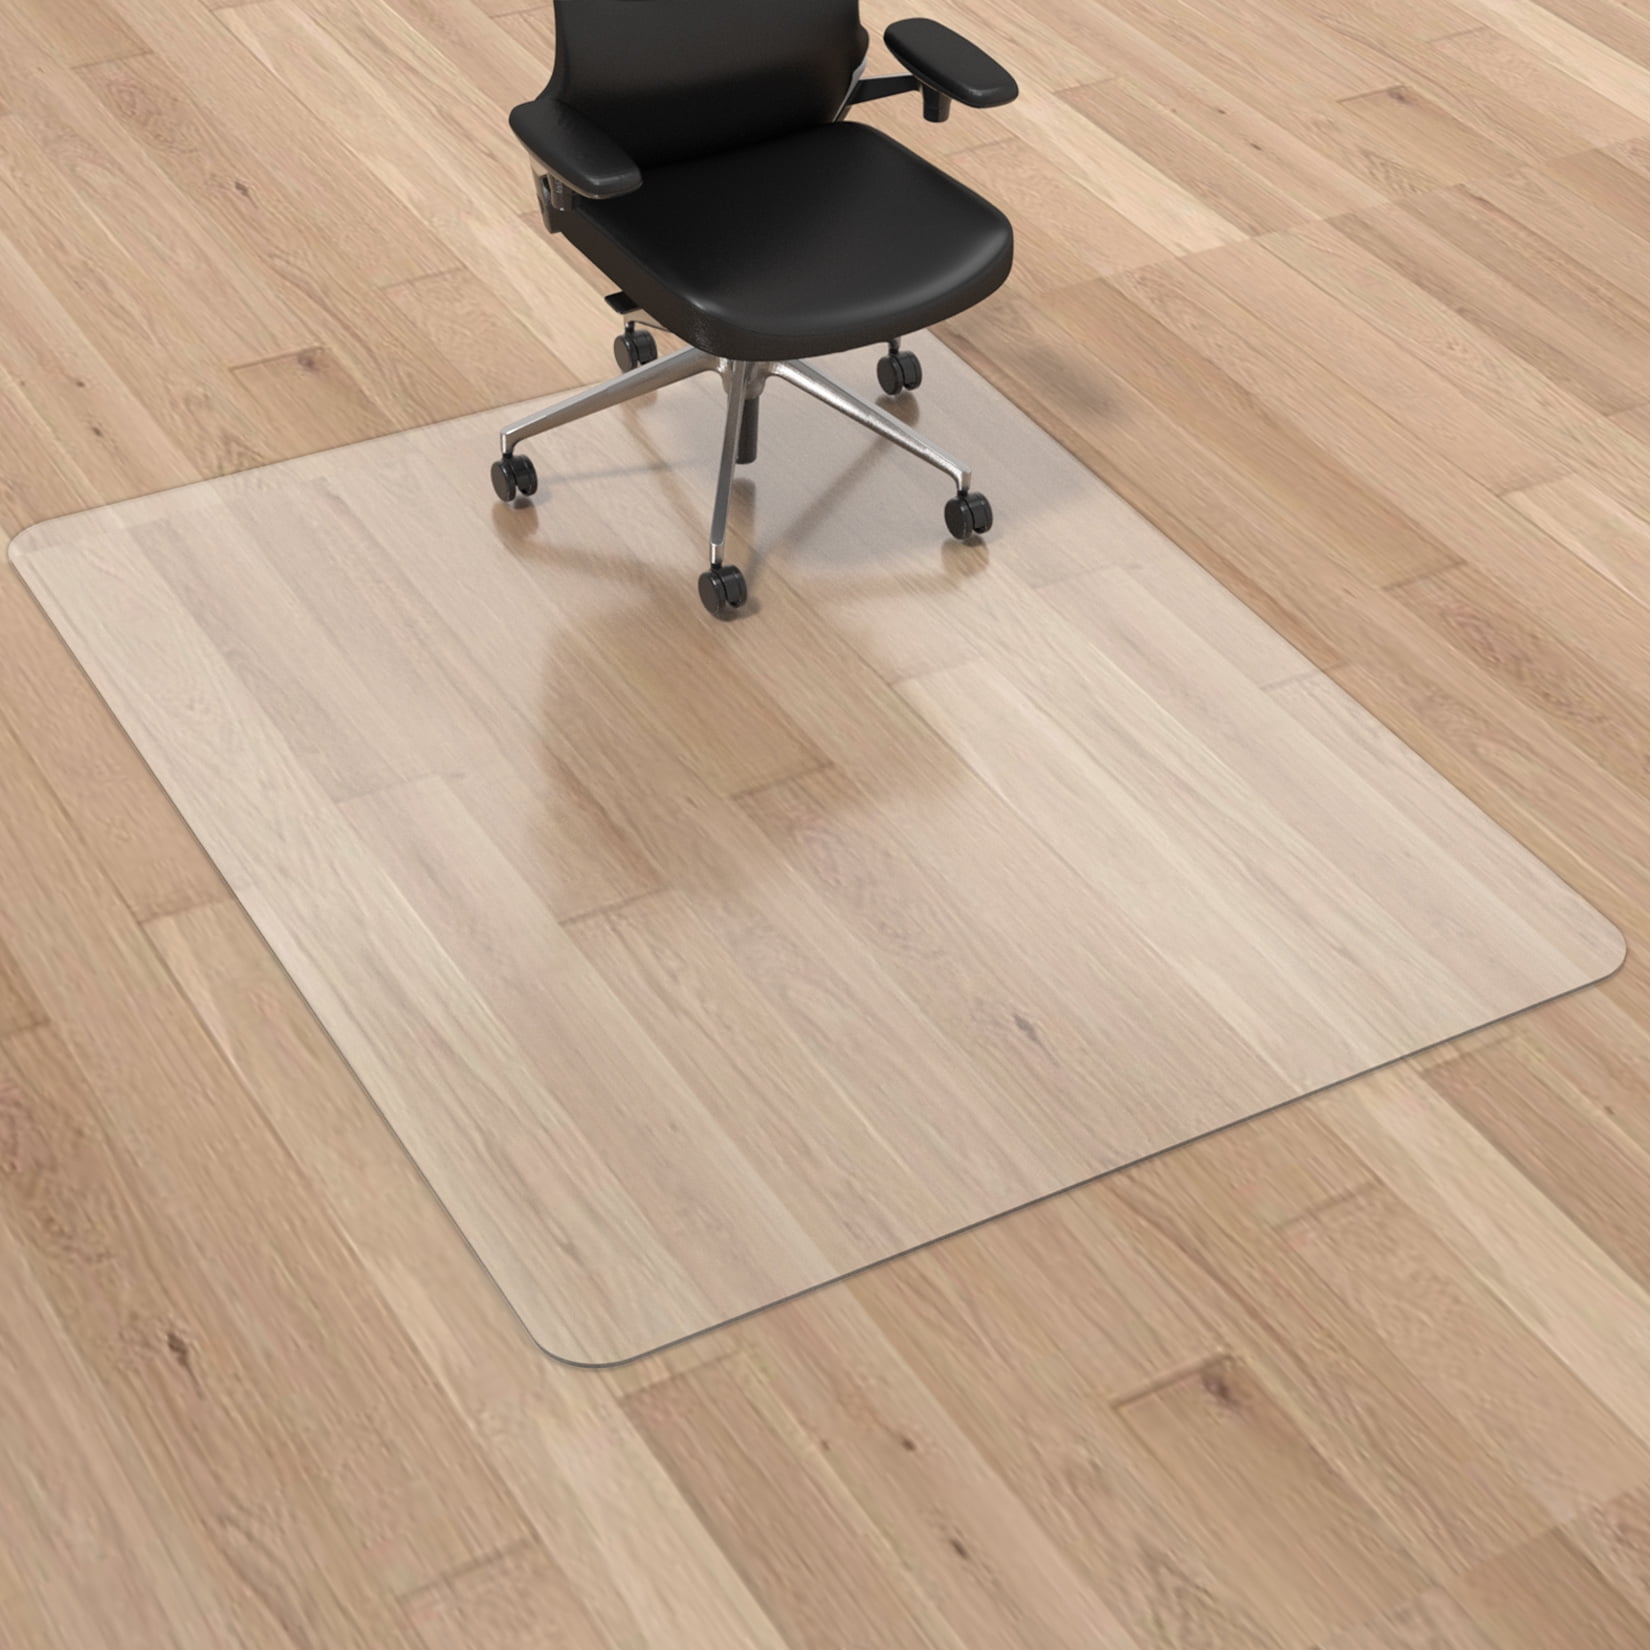 HOMEK Office Chair Mat for Carpet – Computer Desk Chair Mat for Carpeted  Floors – Easy Glide Rolling Plastic Floor Mat for Office Chair on Carpet  for Work, Home, Gaming with Extended